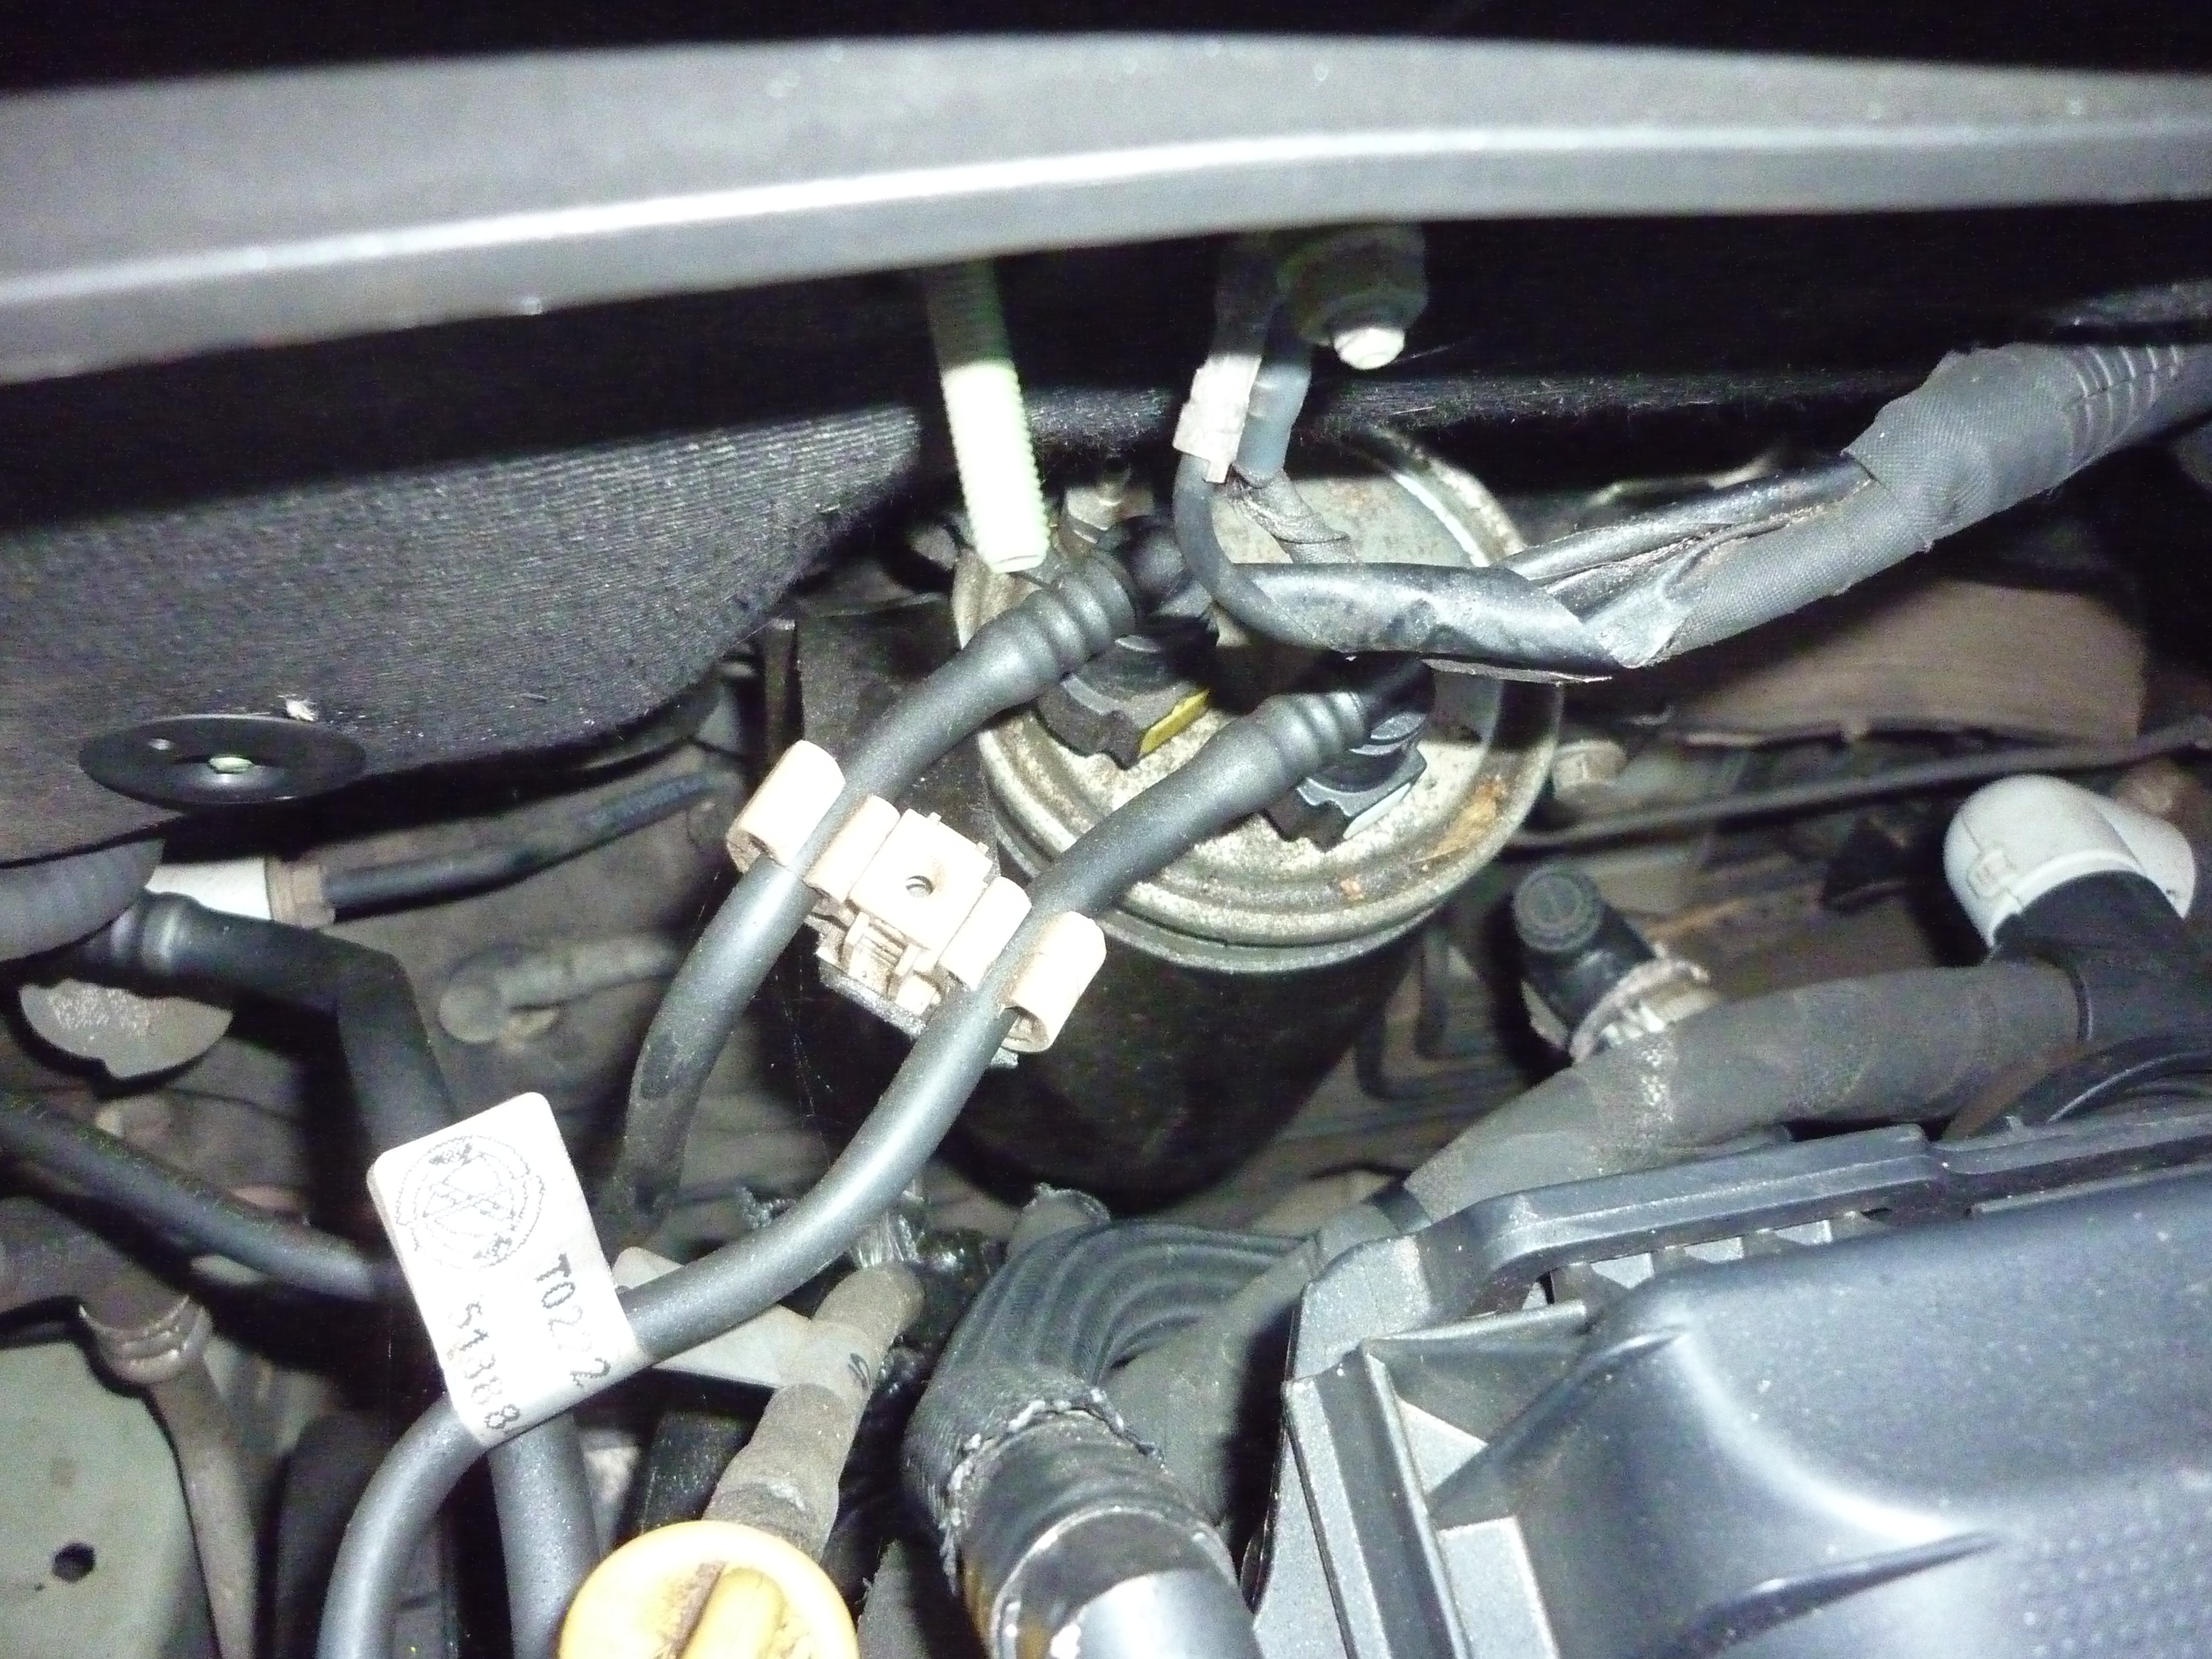 Fuel filter from Above.JPG